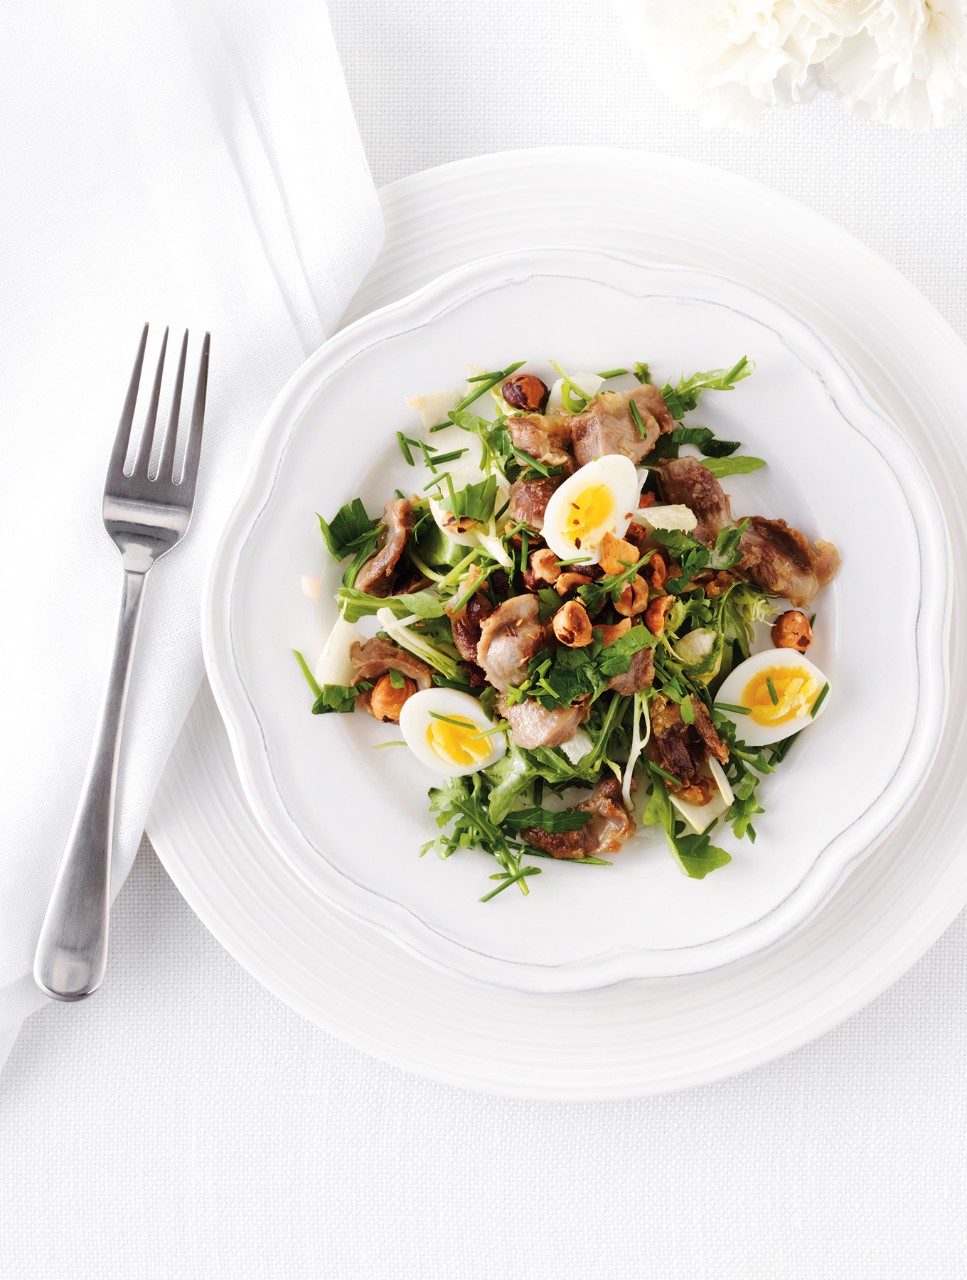 Confit of Chicken Gizzards with Greens and Soft-Boiled Eggs